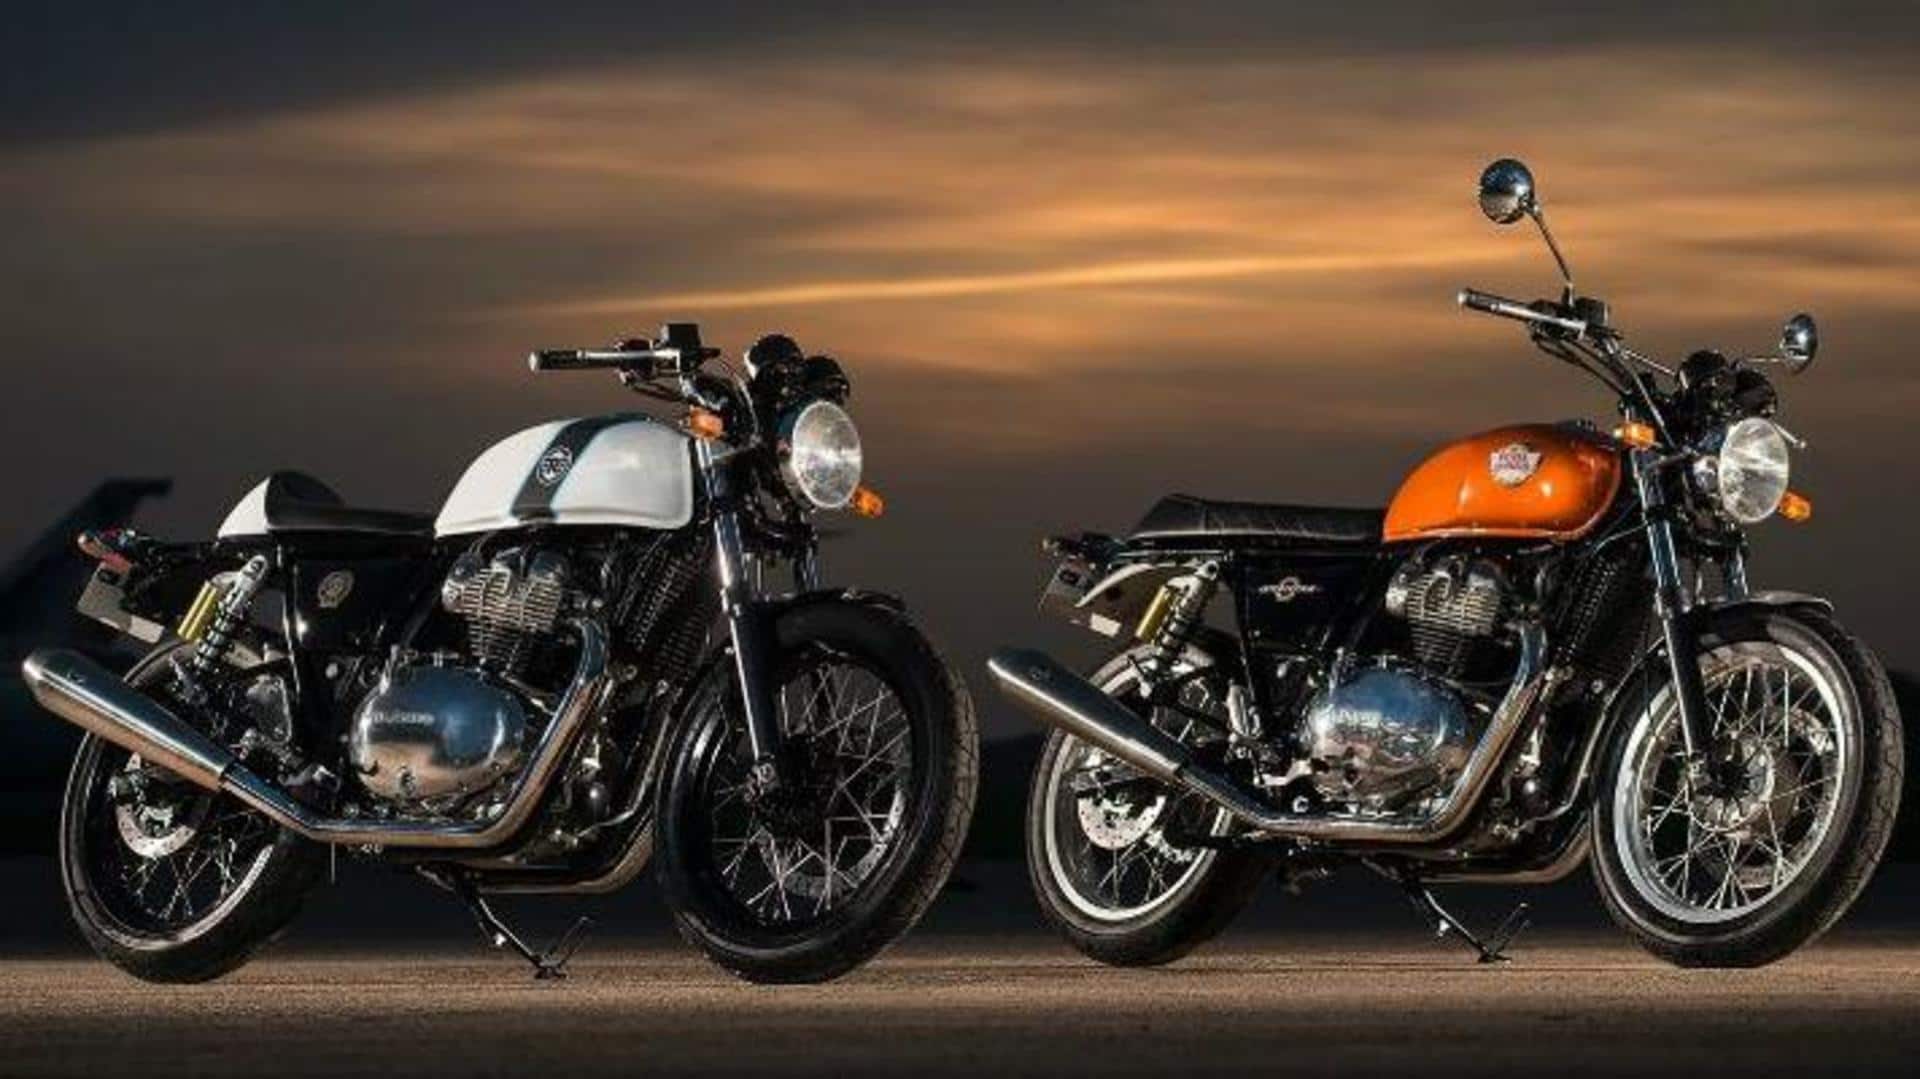 Royal Enfield 650 twins to get alloy wheels, new colors